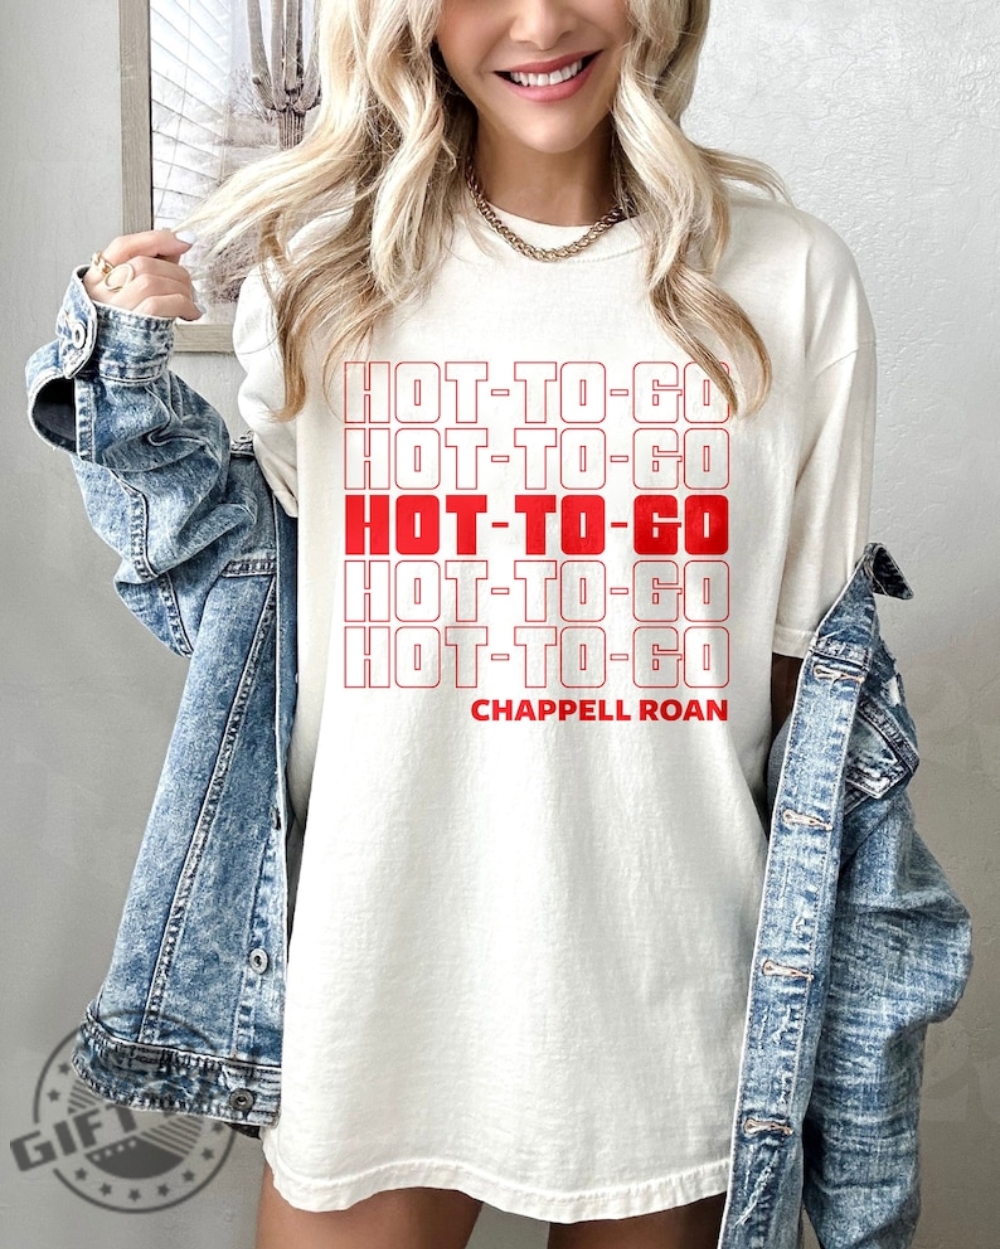 Hot To Go Chappell Roan Shirt